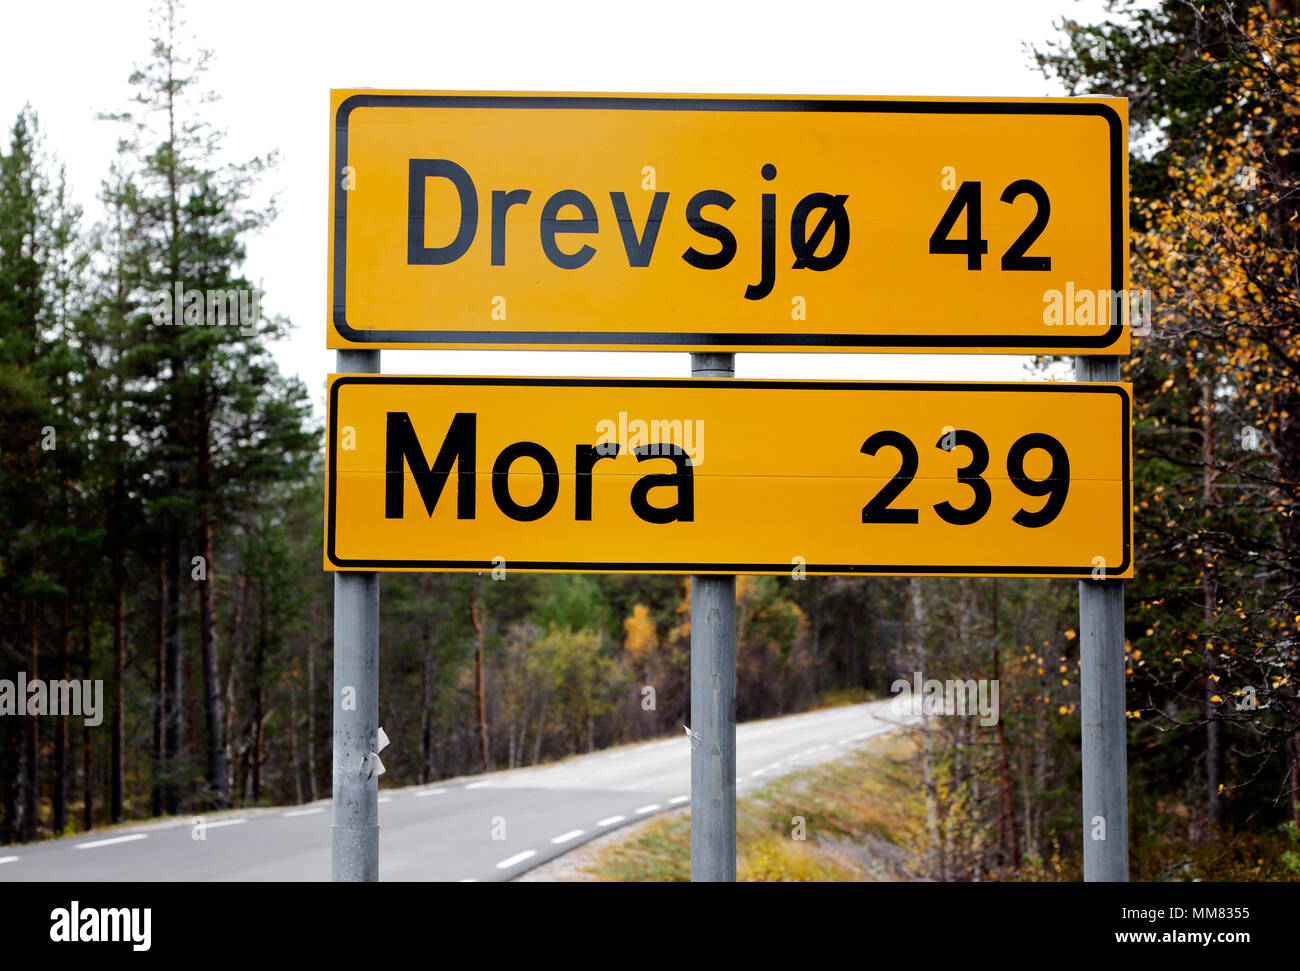 Distance in km to the Norwegian village Drevsjo and the Swedish town Mora on a Norwegian distance indication road rign. Stock Photo